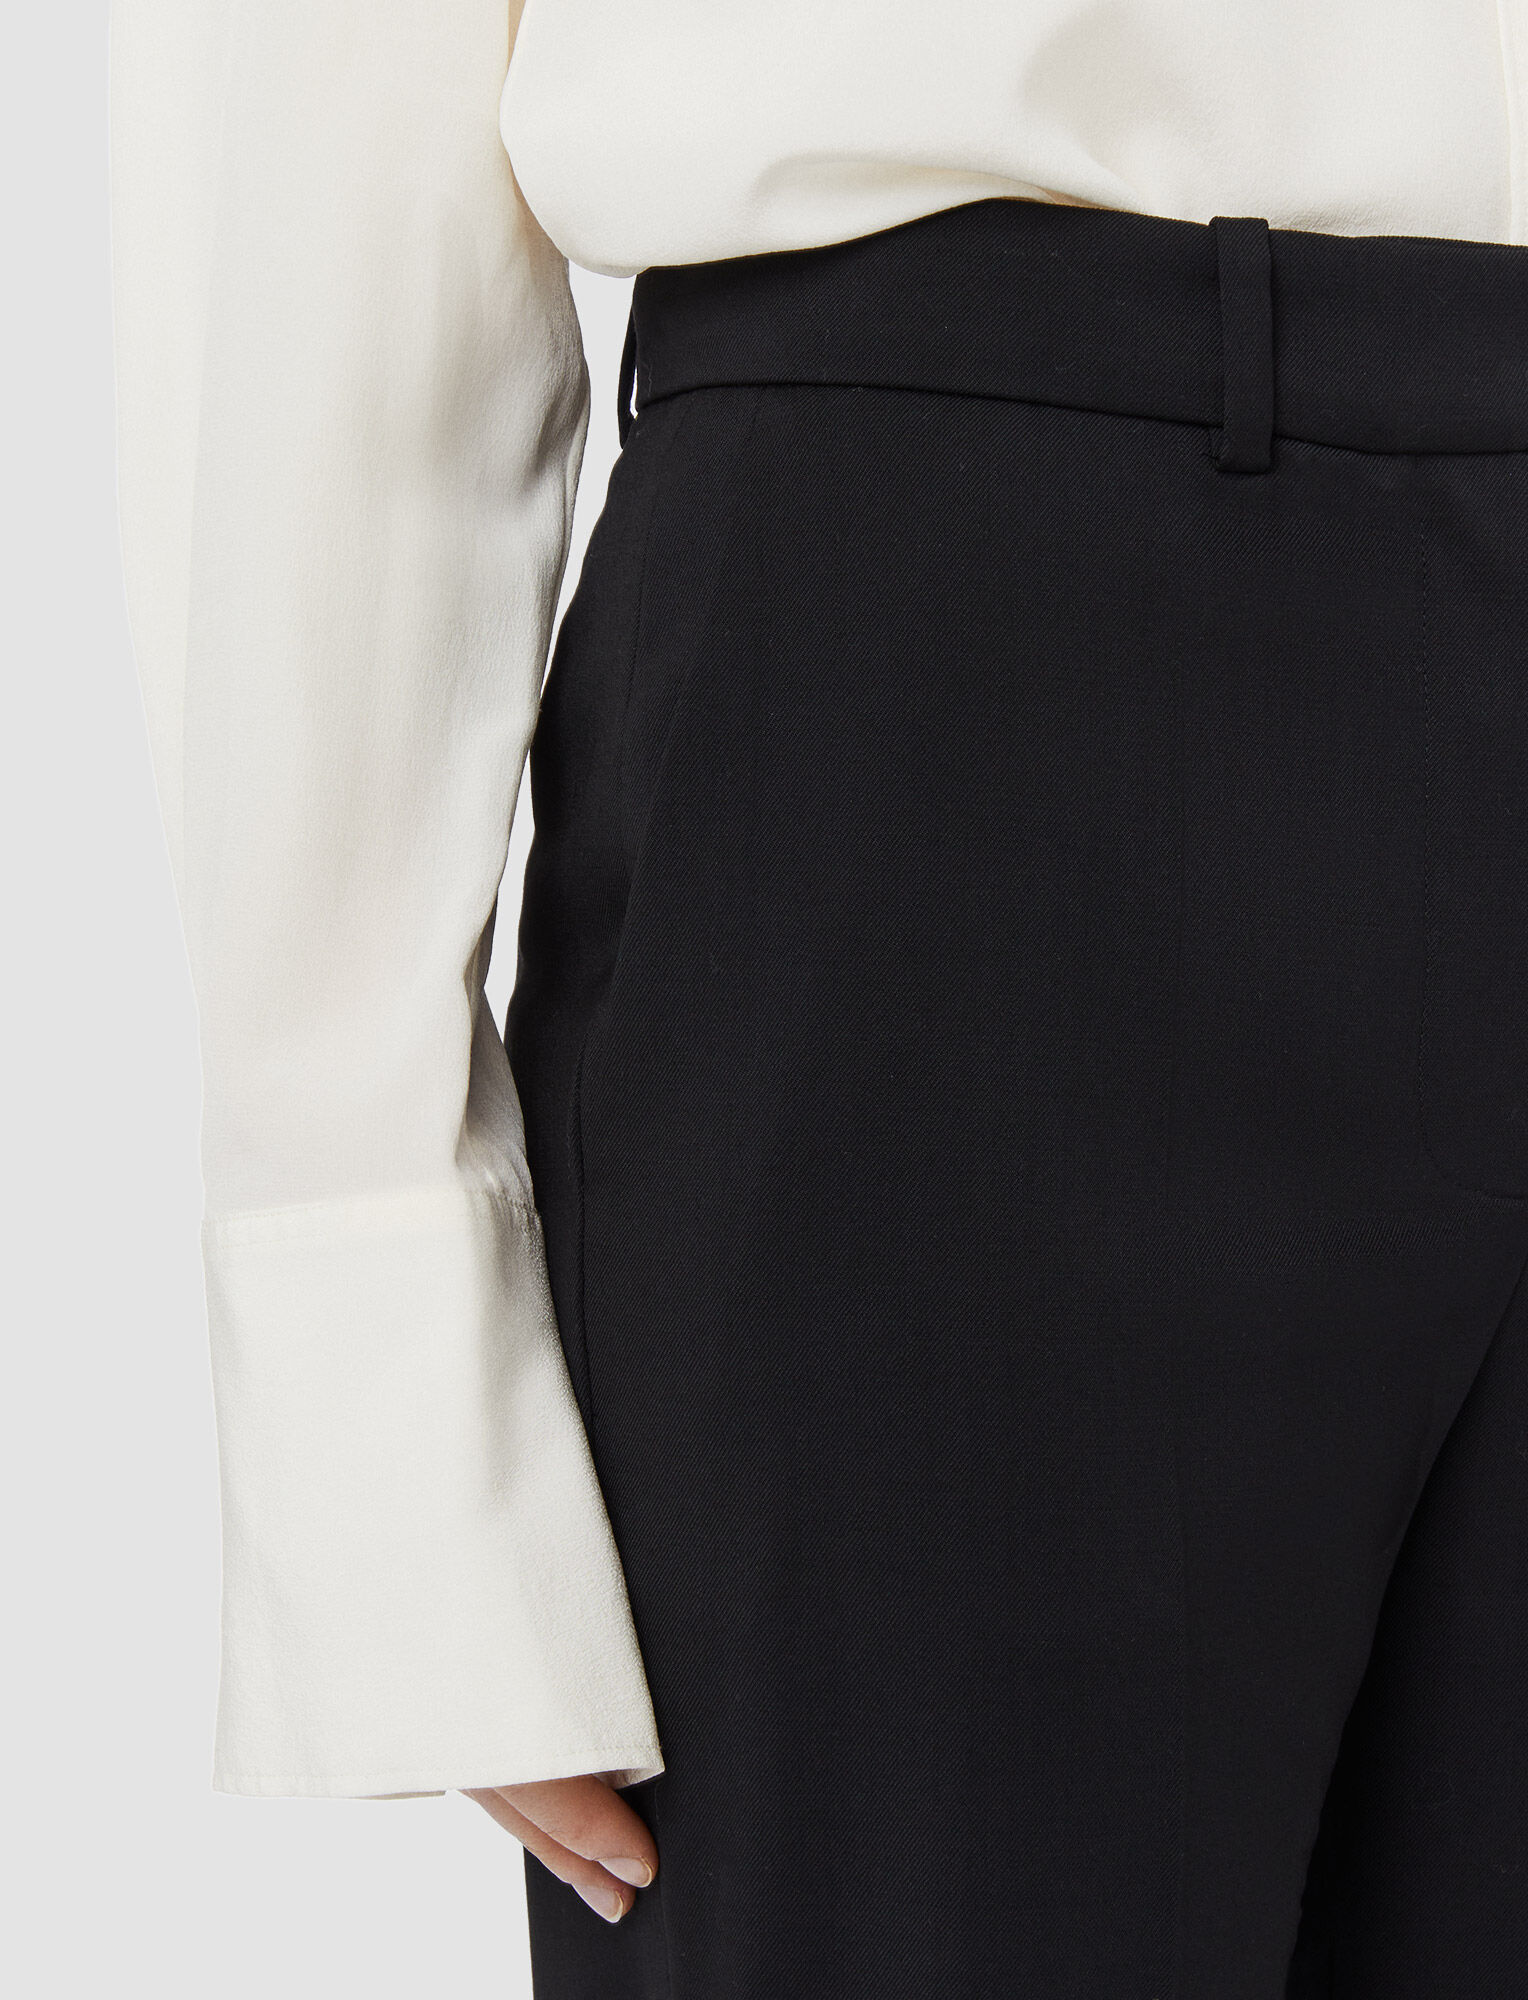 Joseph, Tailoring Wool Stretch Morissey Trousers, in Black